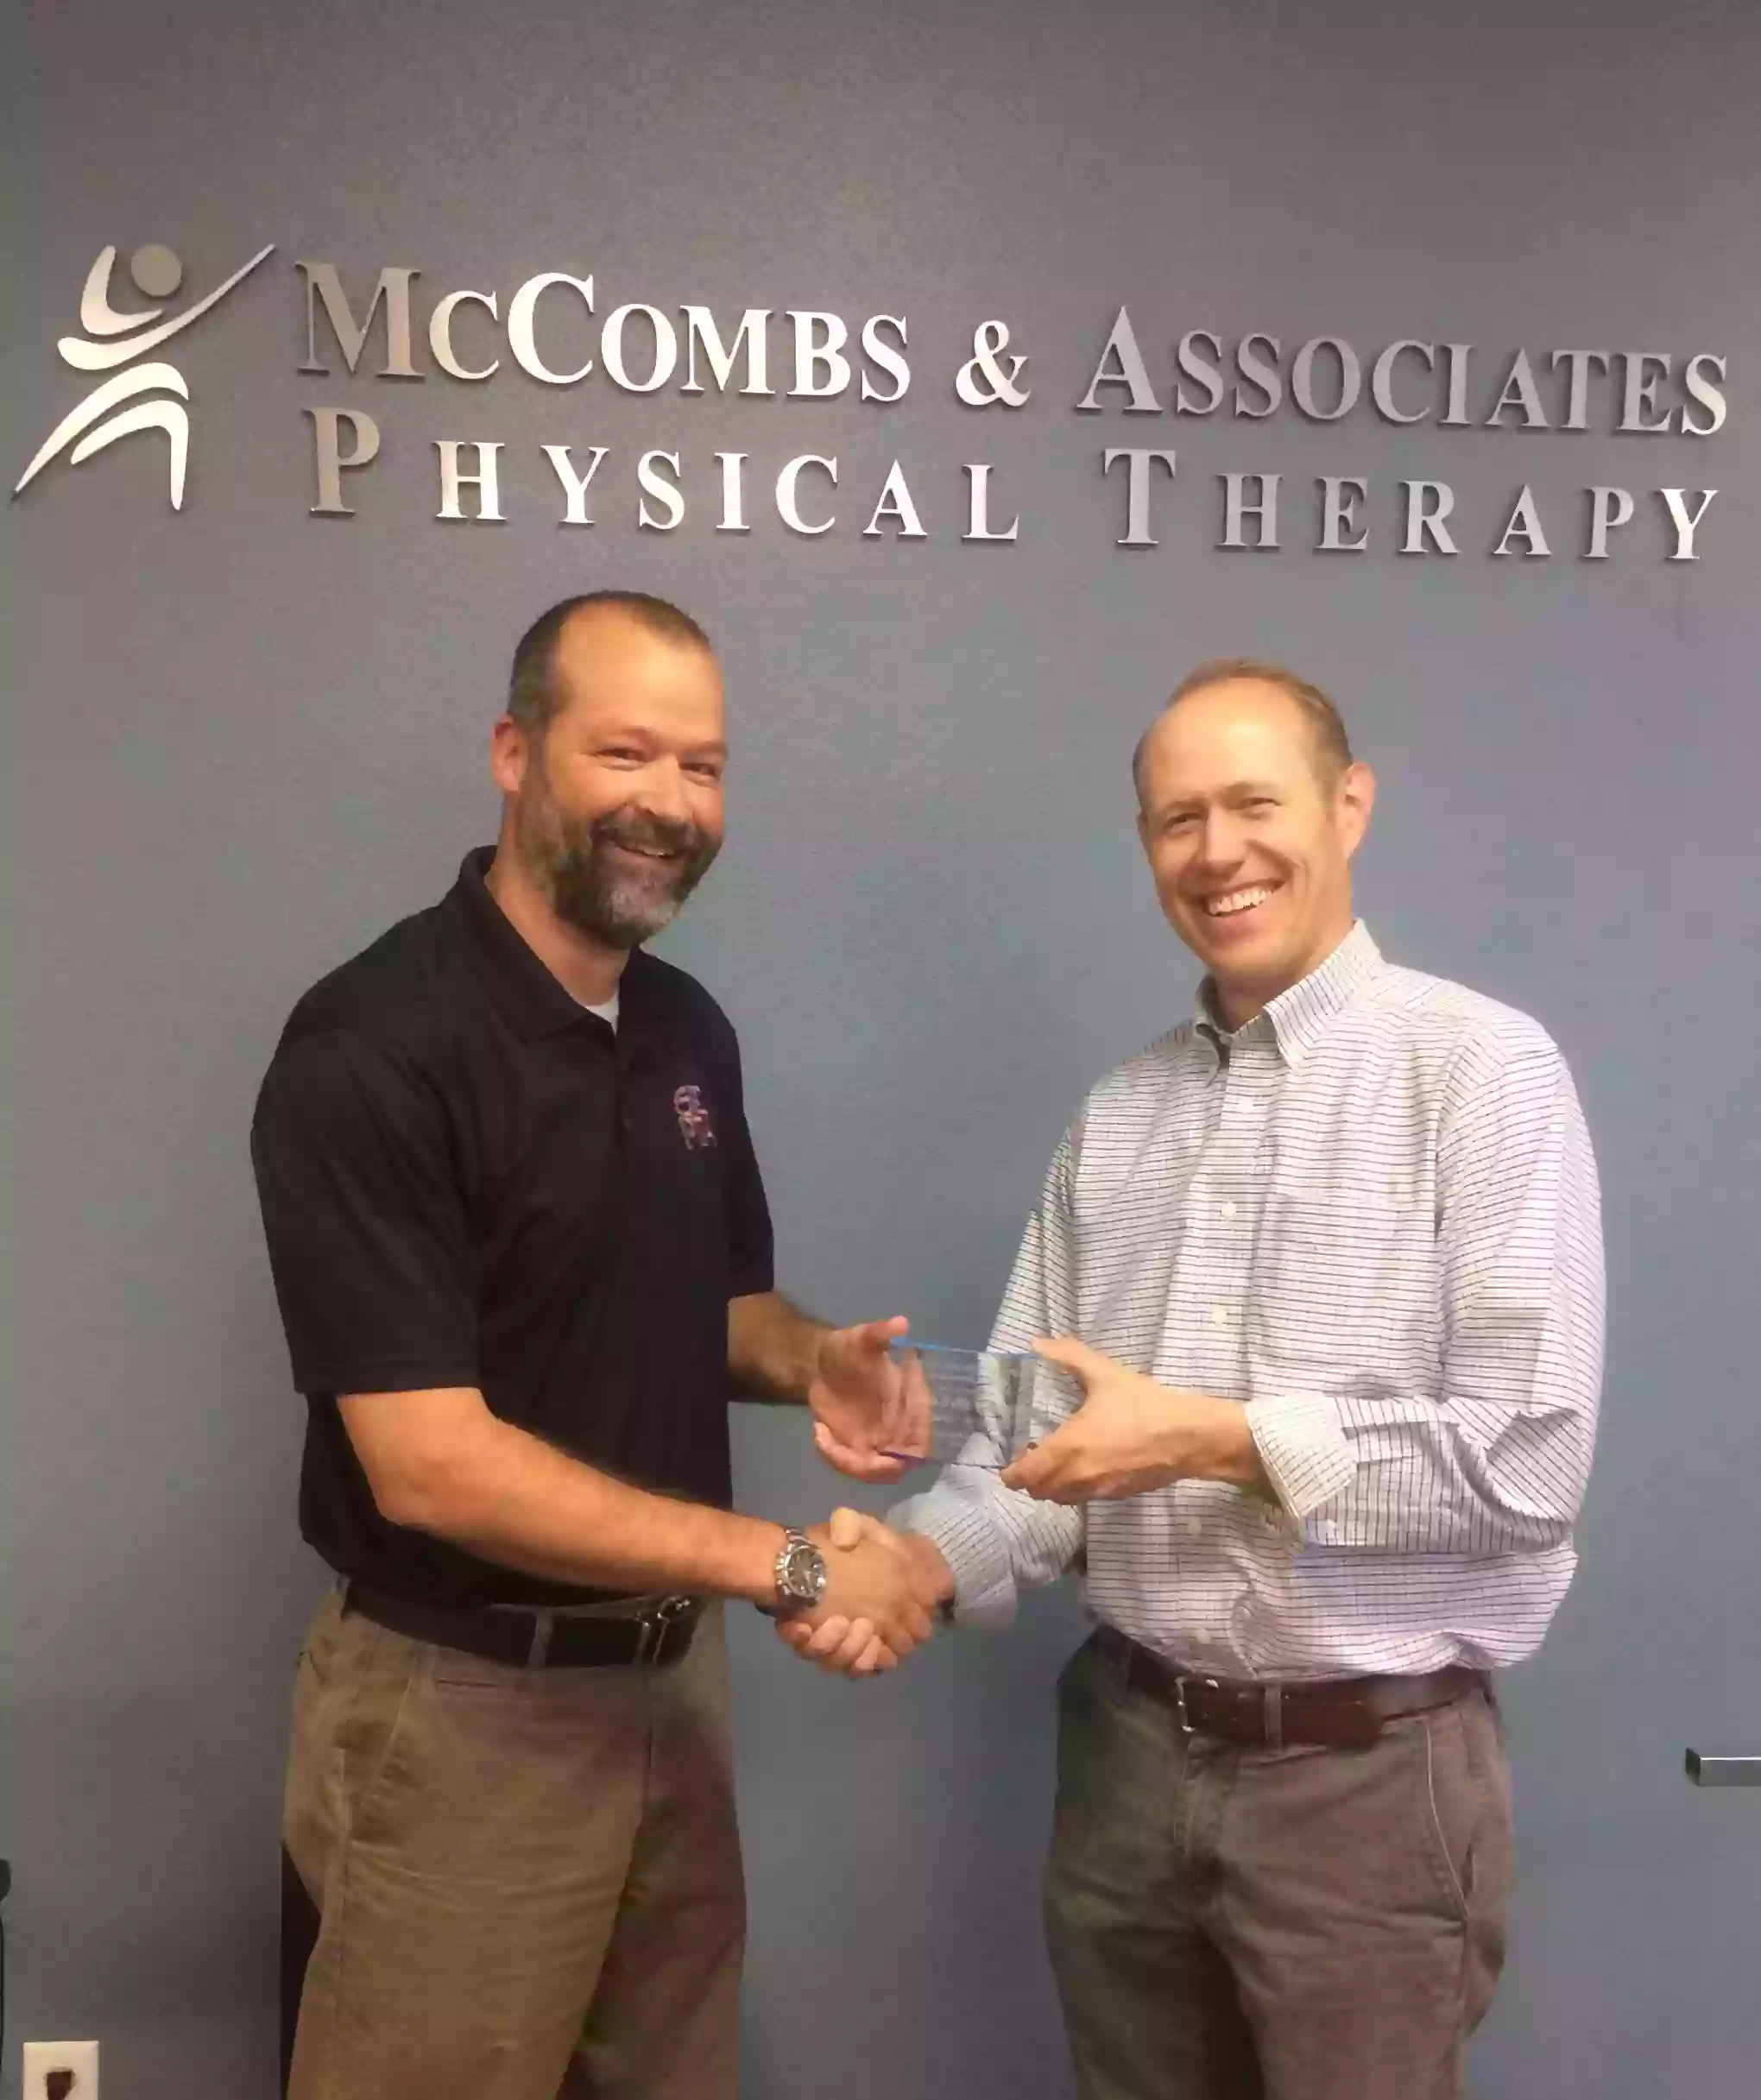 McCombs & Associates Physical Therapy